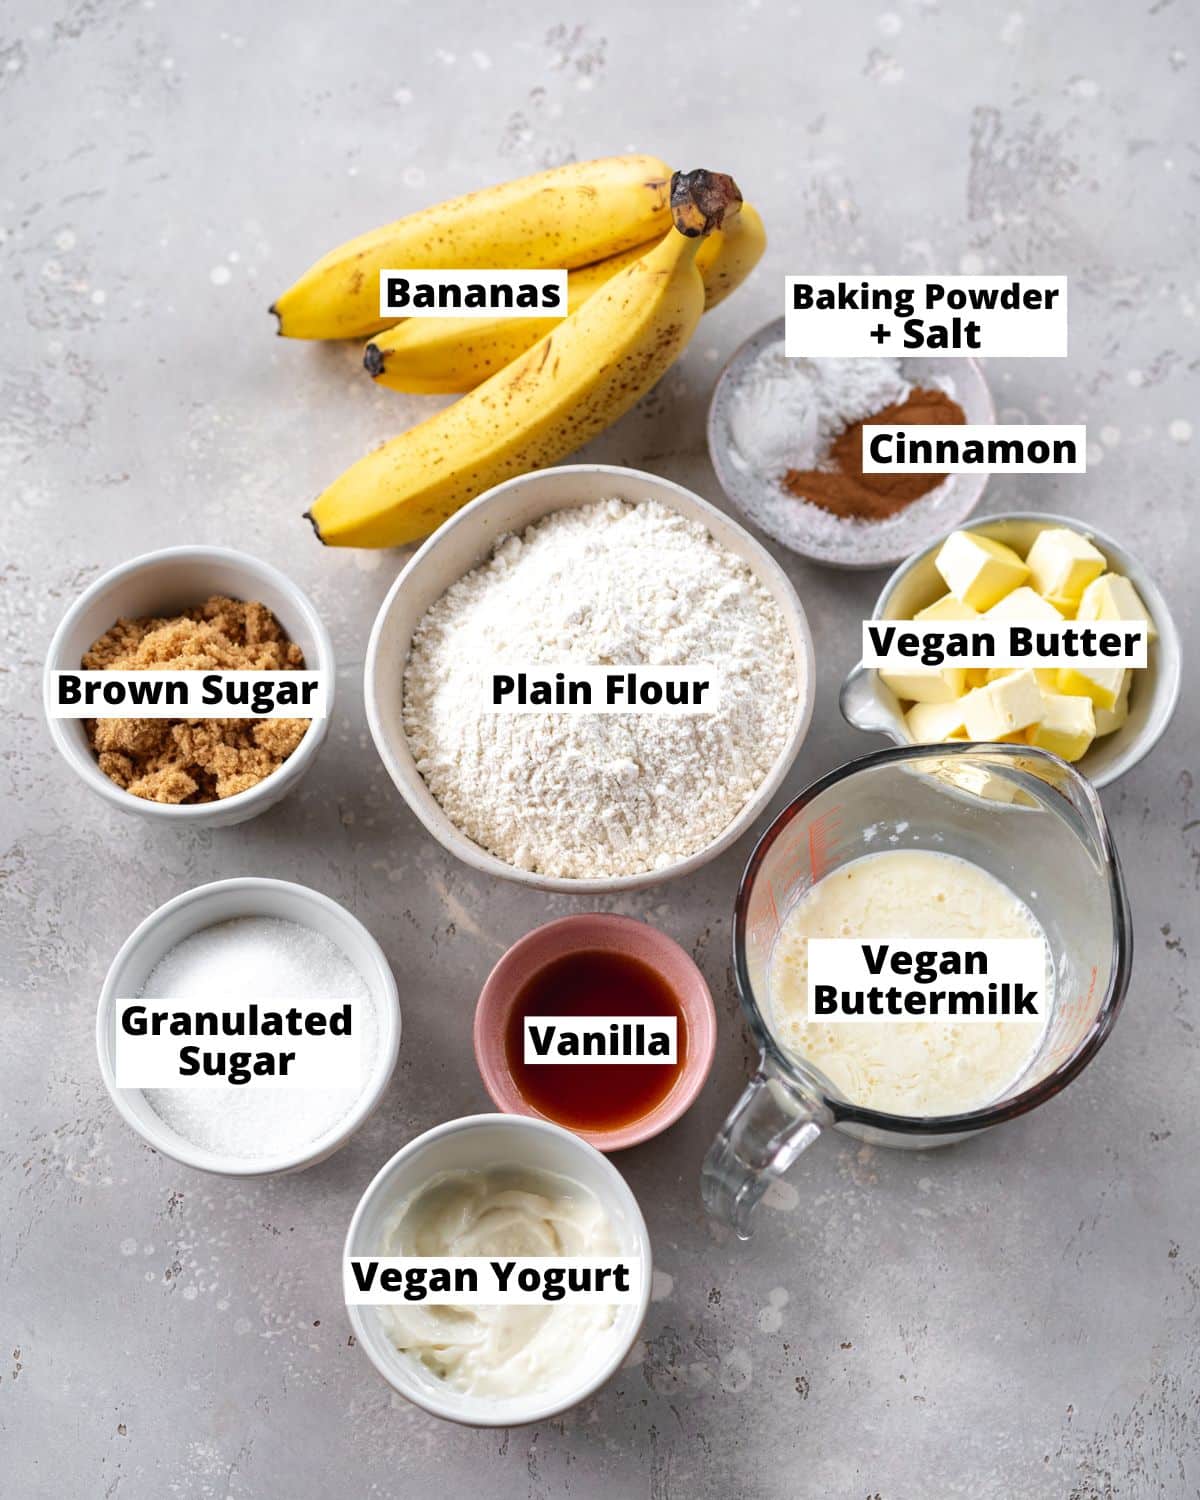 ingredients for vegan banana cake measured out in bowls on a grey stone surface.